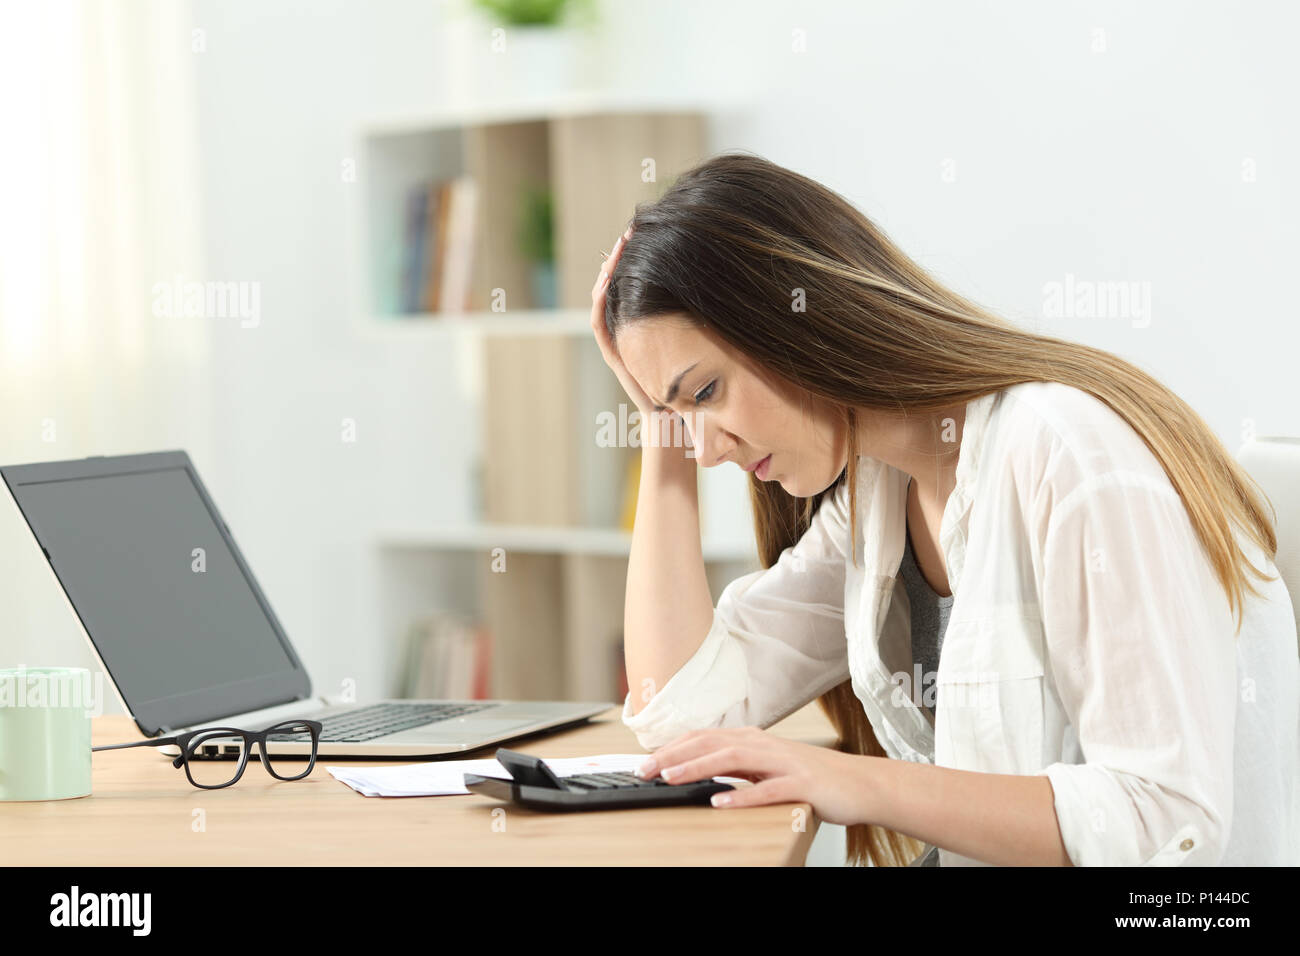 Worried housewife doing accounting using a calculator at home Stock Photo